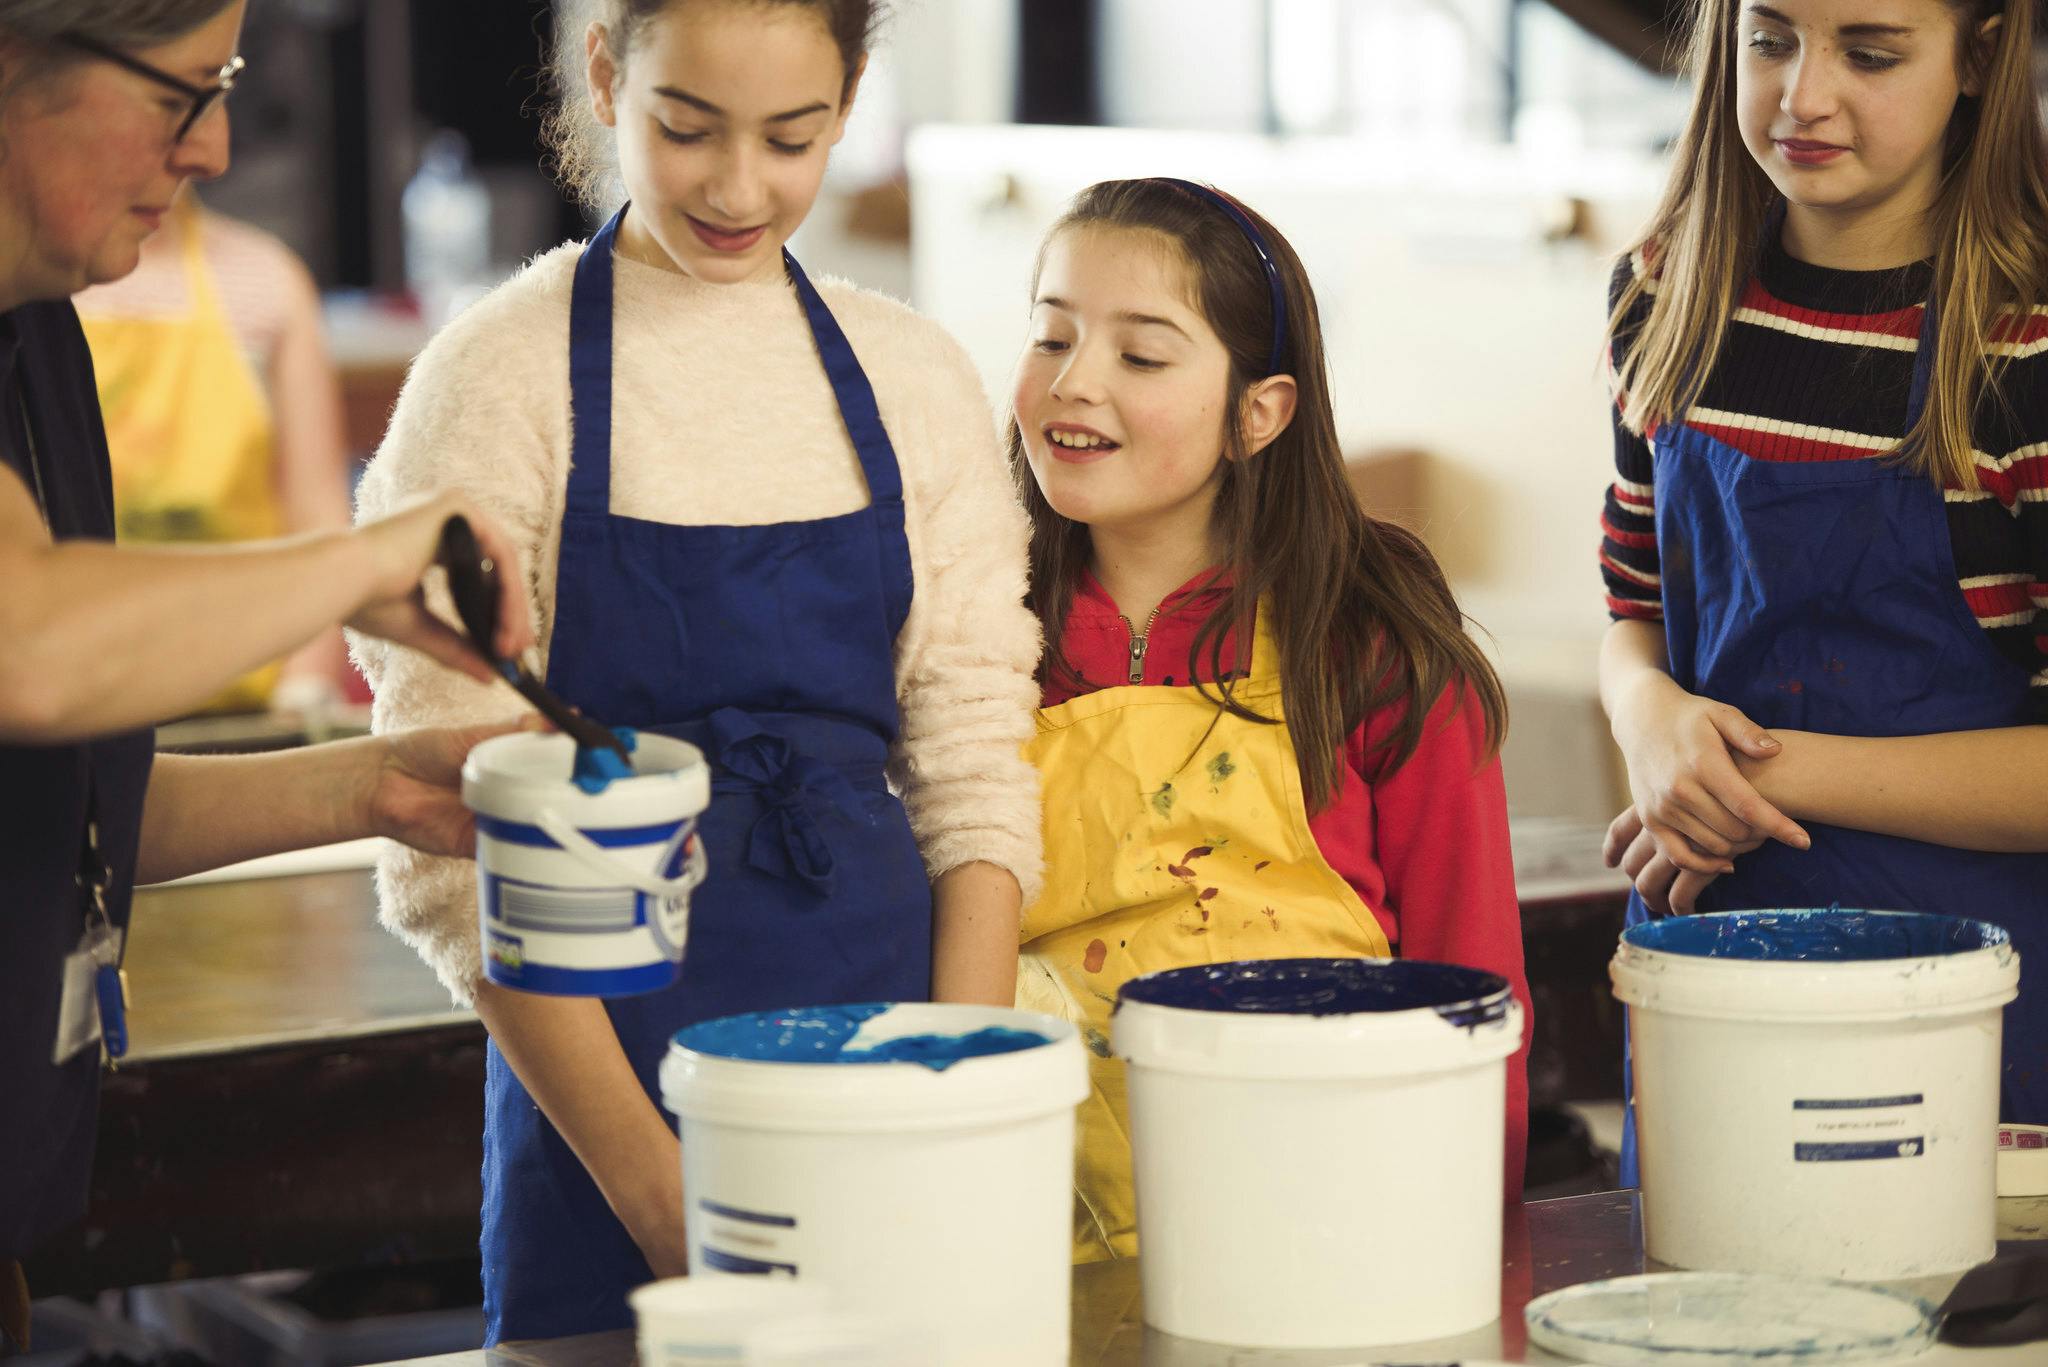 A staff member leans in to show a group of young girls a pot of paint. The girls smile and lean in to see the colour up-close. Three more paint tubs are in the foreground.